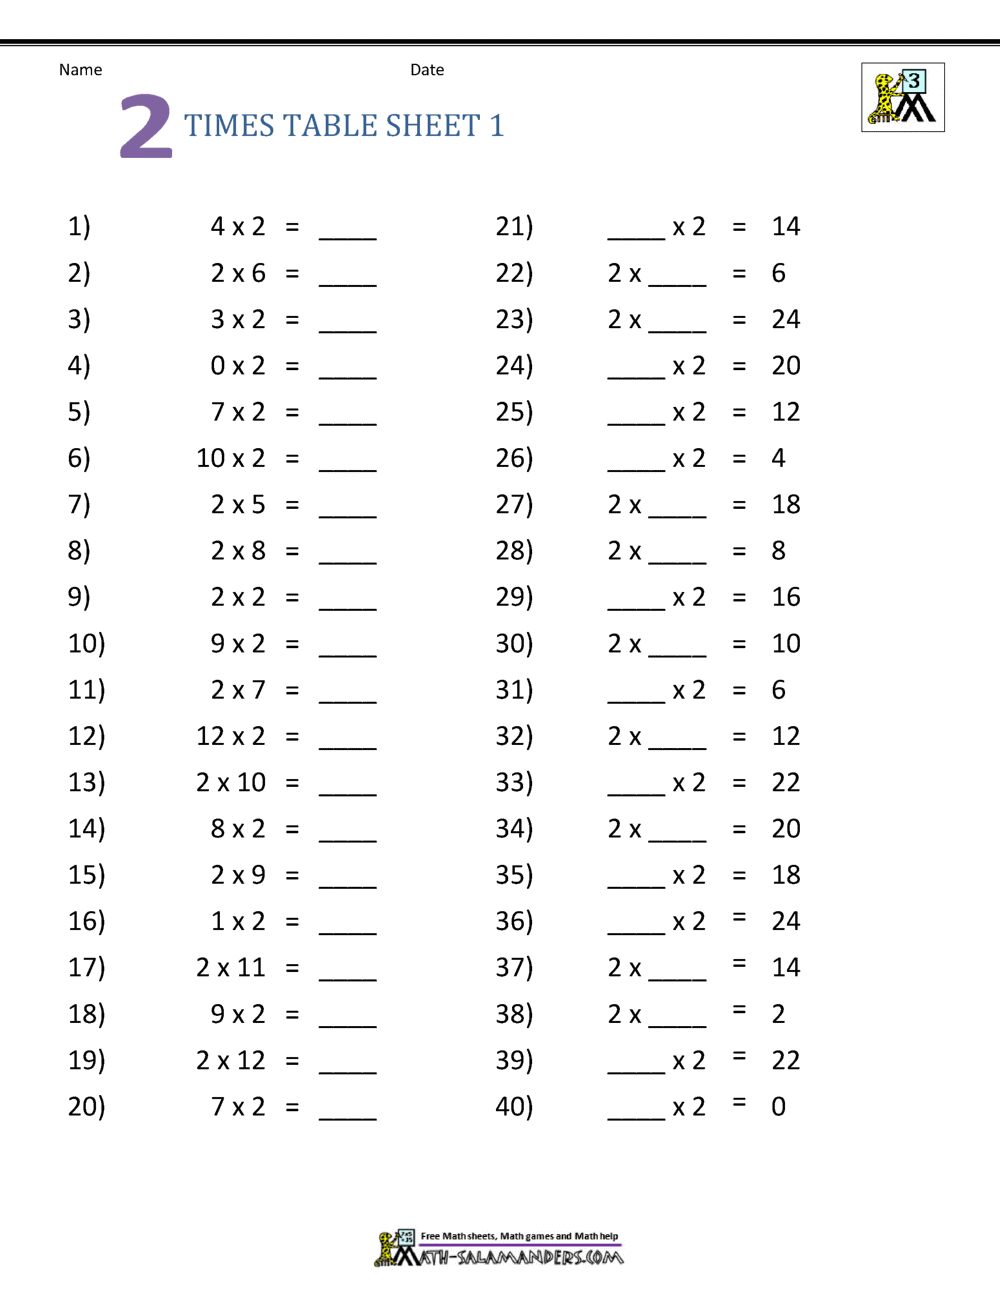 Multiplication Table Worksheets Grade 20 With 2 Times Table Worksheet